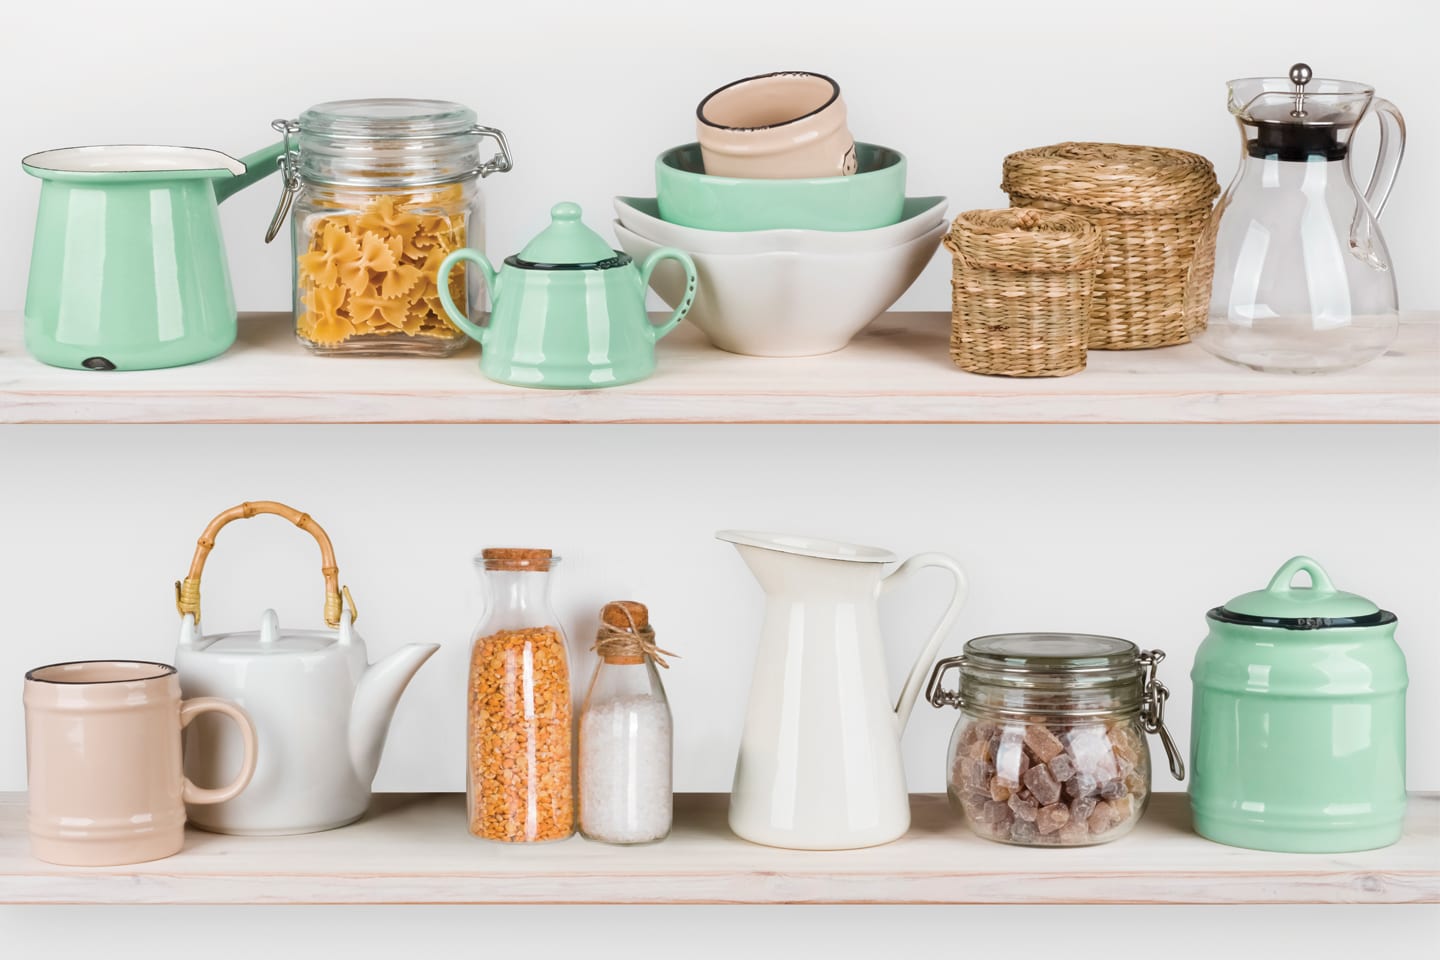 pantry shelves with jars of food and various ceramic dishes in chattanooga